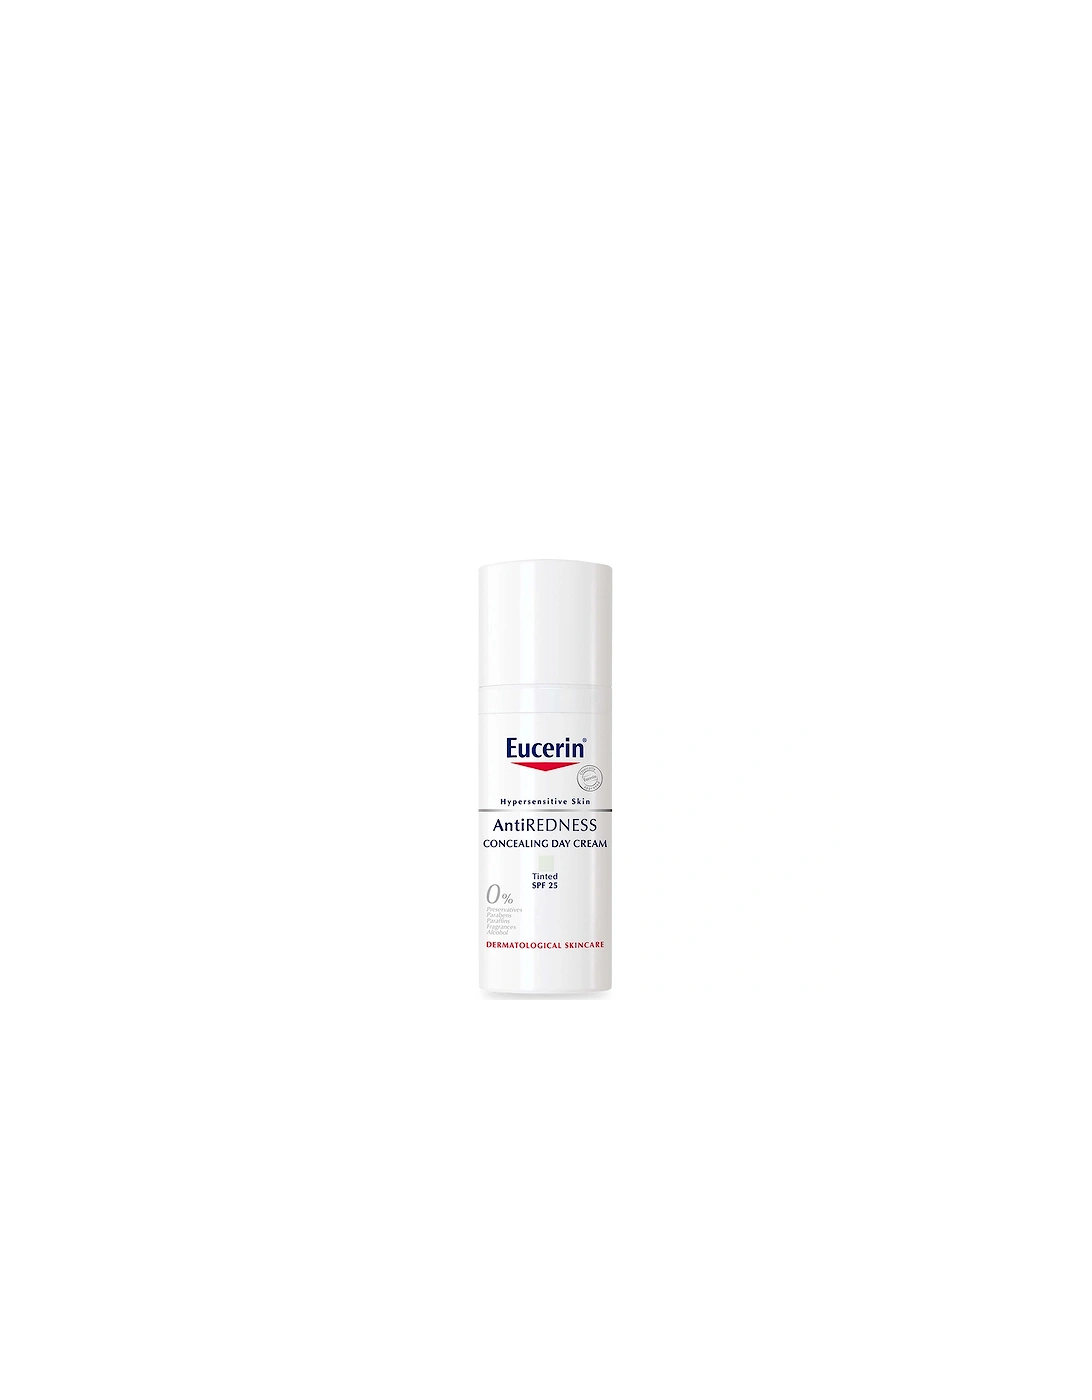 AntiRedness Concealing Day Cream SPF25 Tinted 50ml - - Eucerin® Hypersensitive Skin Anti Redness Concealing Day Cream (50ml) - Exe, 2 of 1